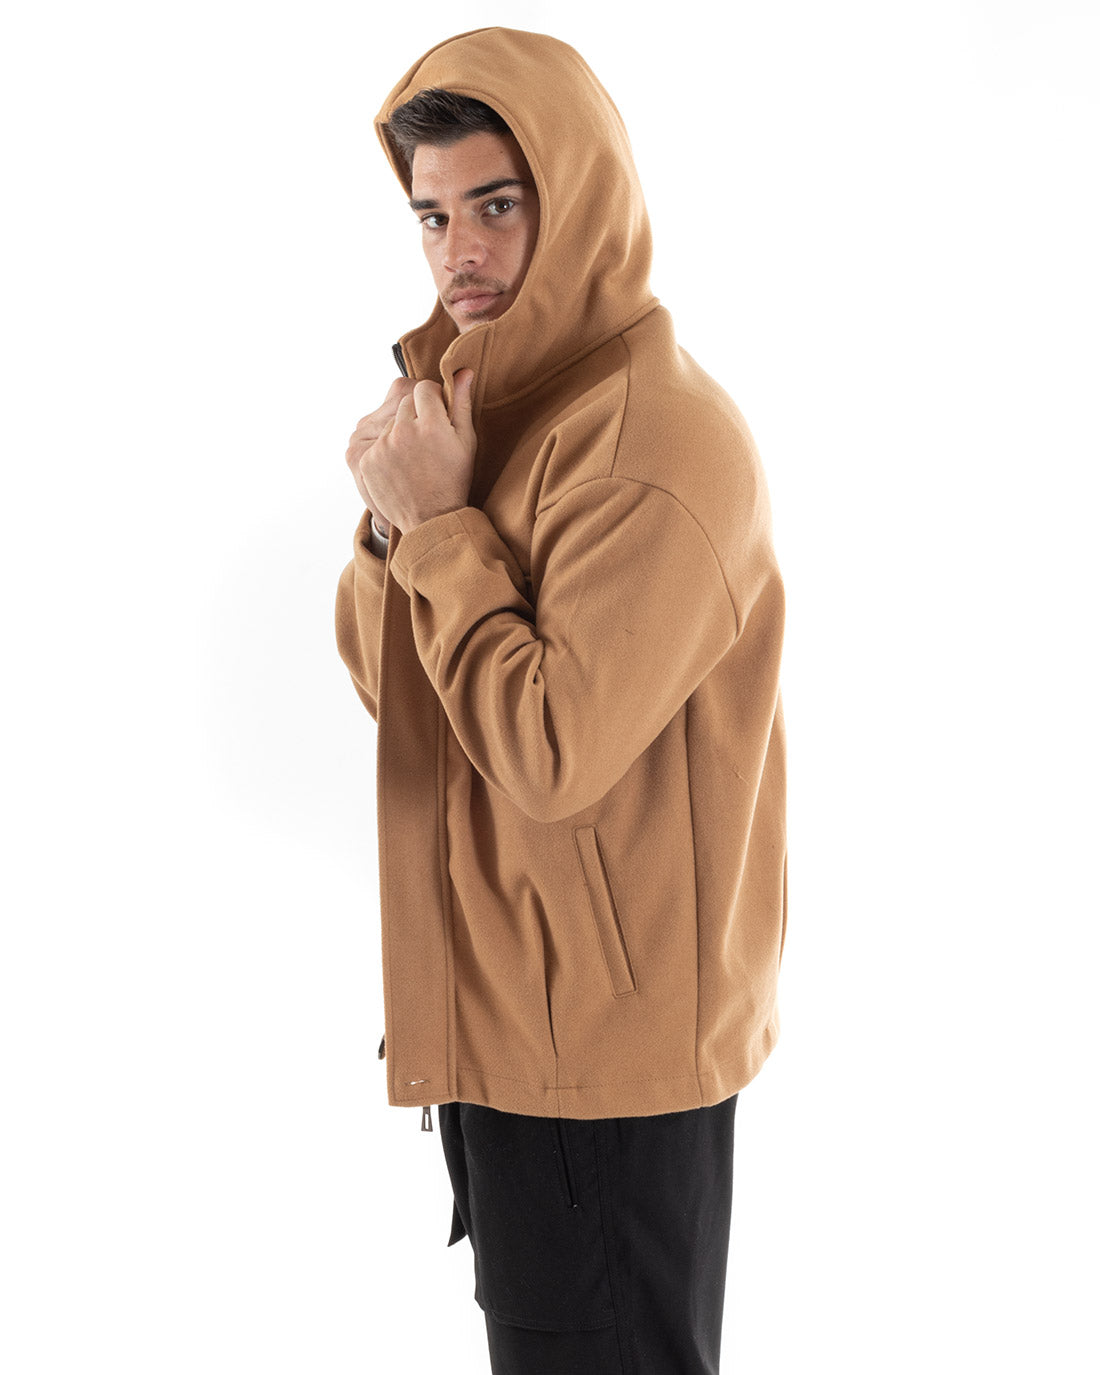 Coat Jacket Men's Jacket With Zip Suede Hood Solid Color Camel Casual GIOSAL-G2946A